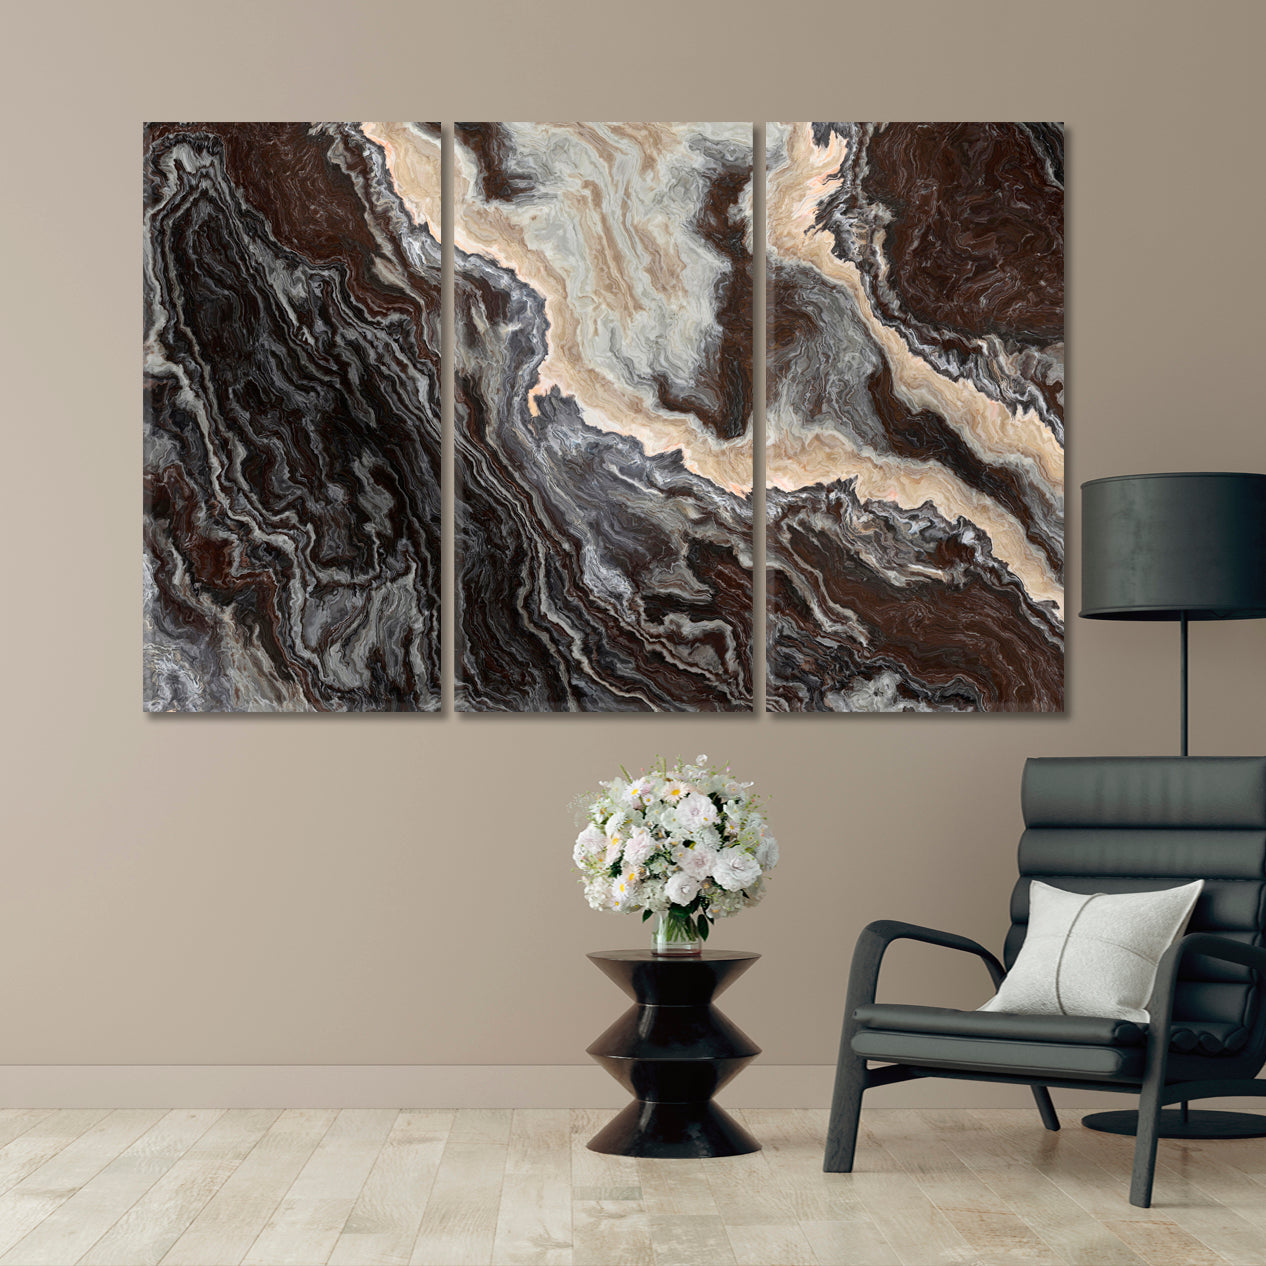 MARBLE Pattern Curly Grey Black Brown Veins Abstract Abstract Art Print Artesty 3 panels 36" x 24" 